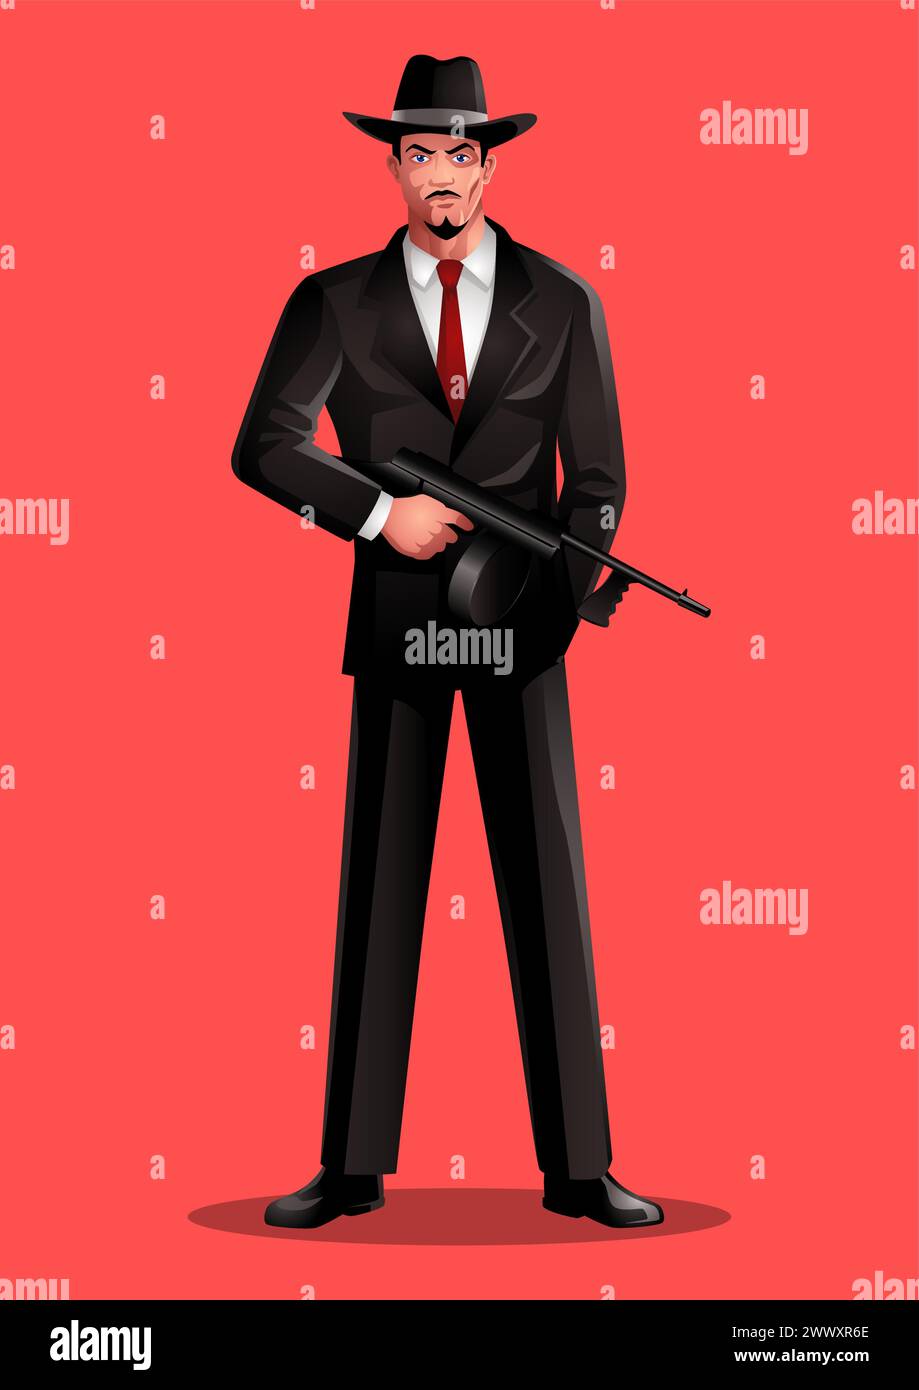 Vector illustration of of a man holding machine gun, gangster, mobster, mafia character Stock Vector